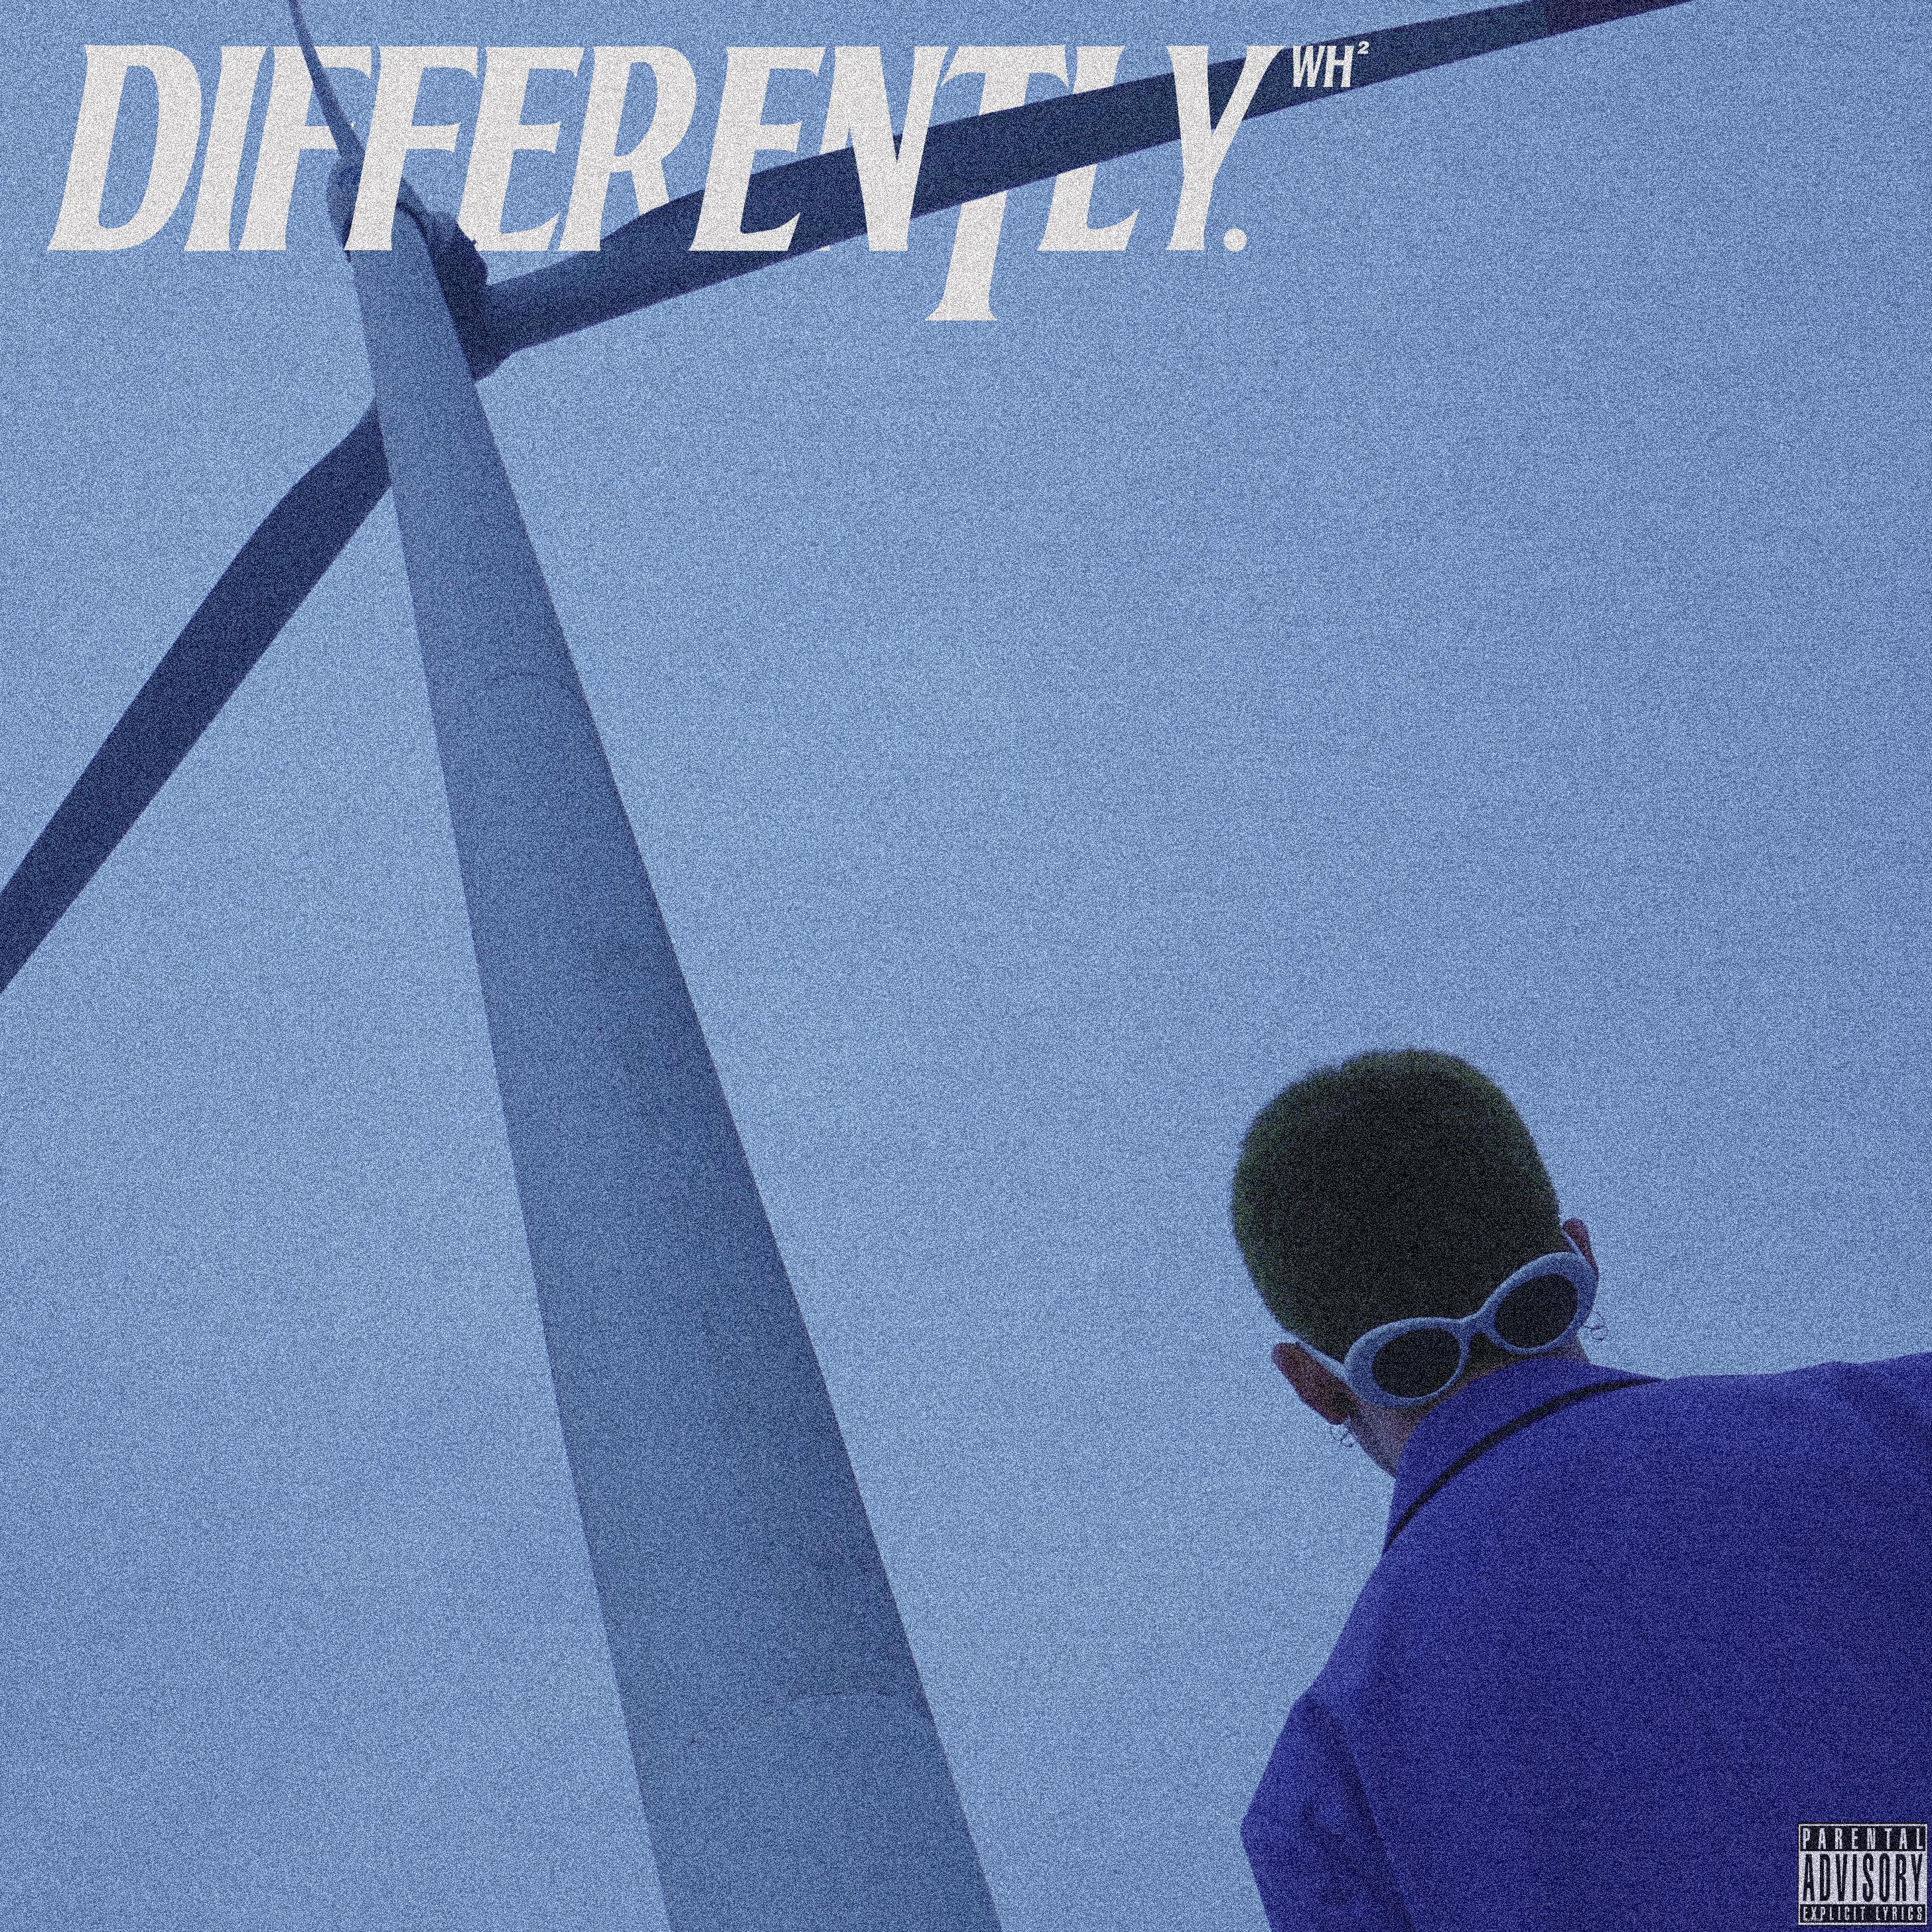 DIFFERENTLY EP.